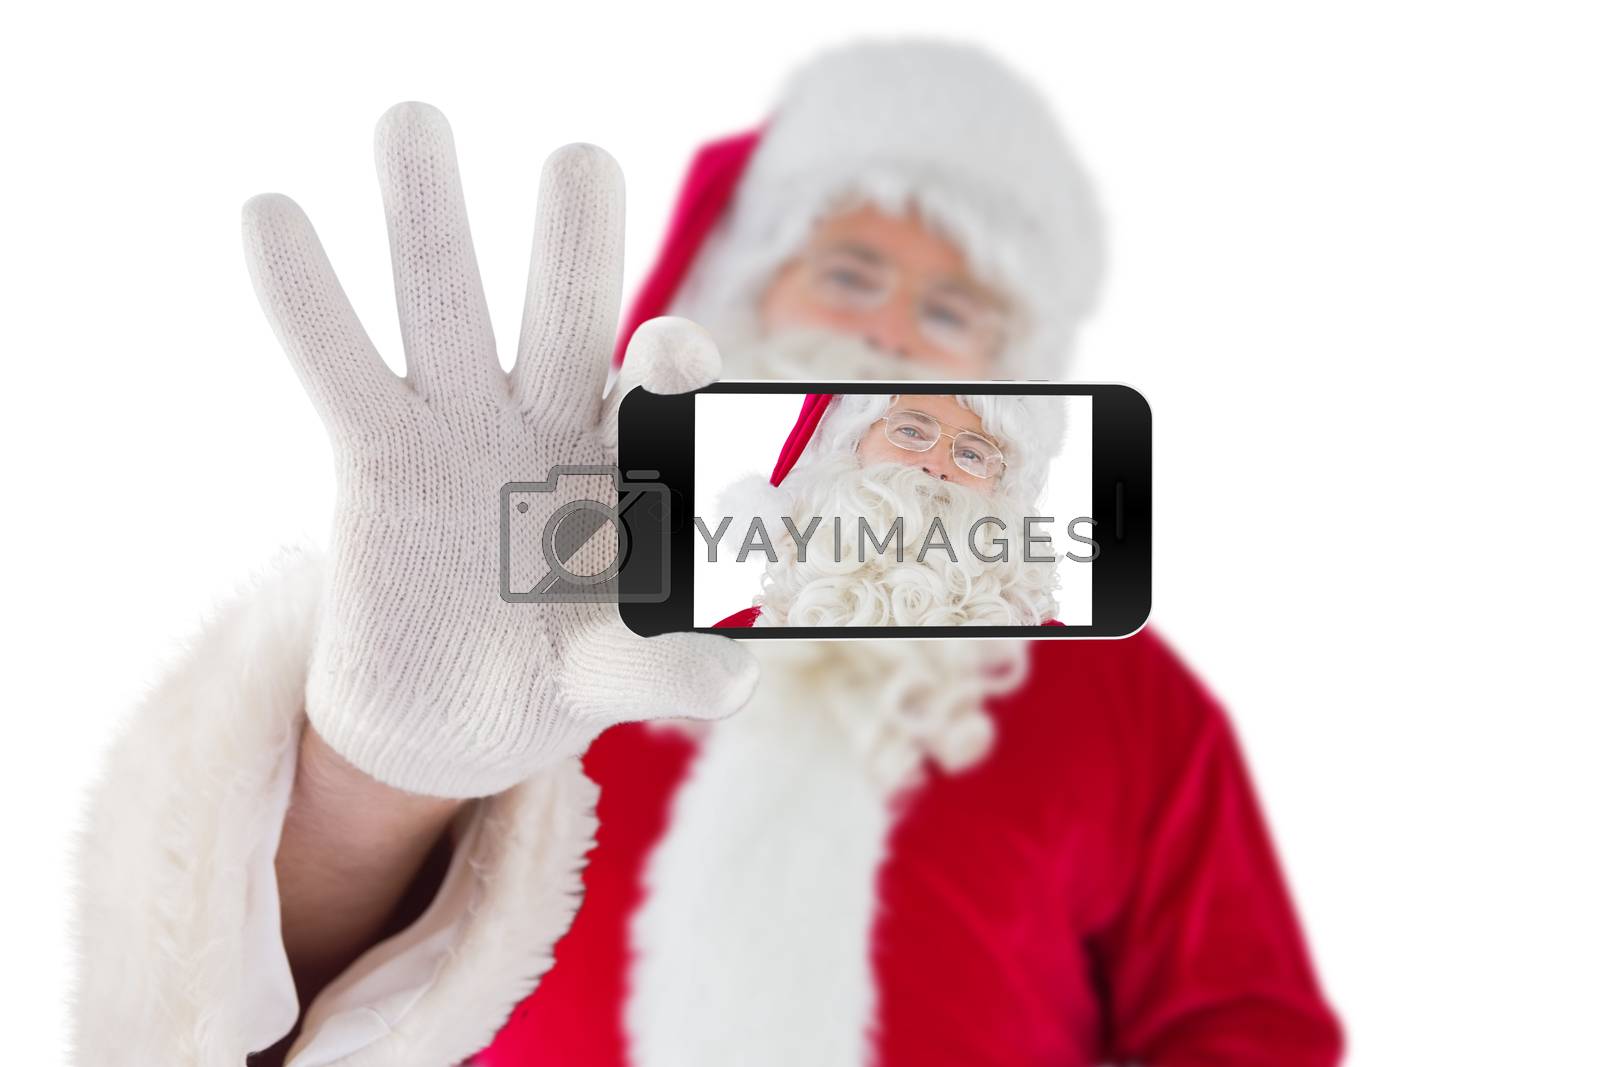 Royalty free image of Composite image of hand holding mobile phone by Wavebreakmedia